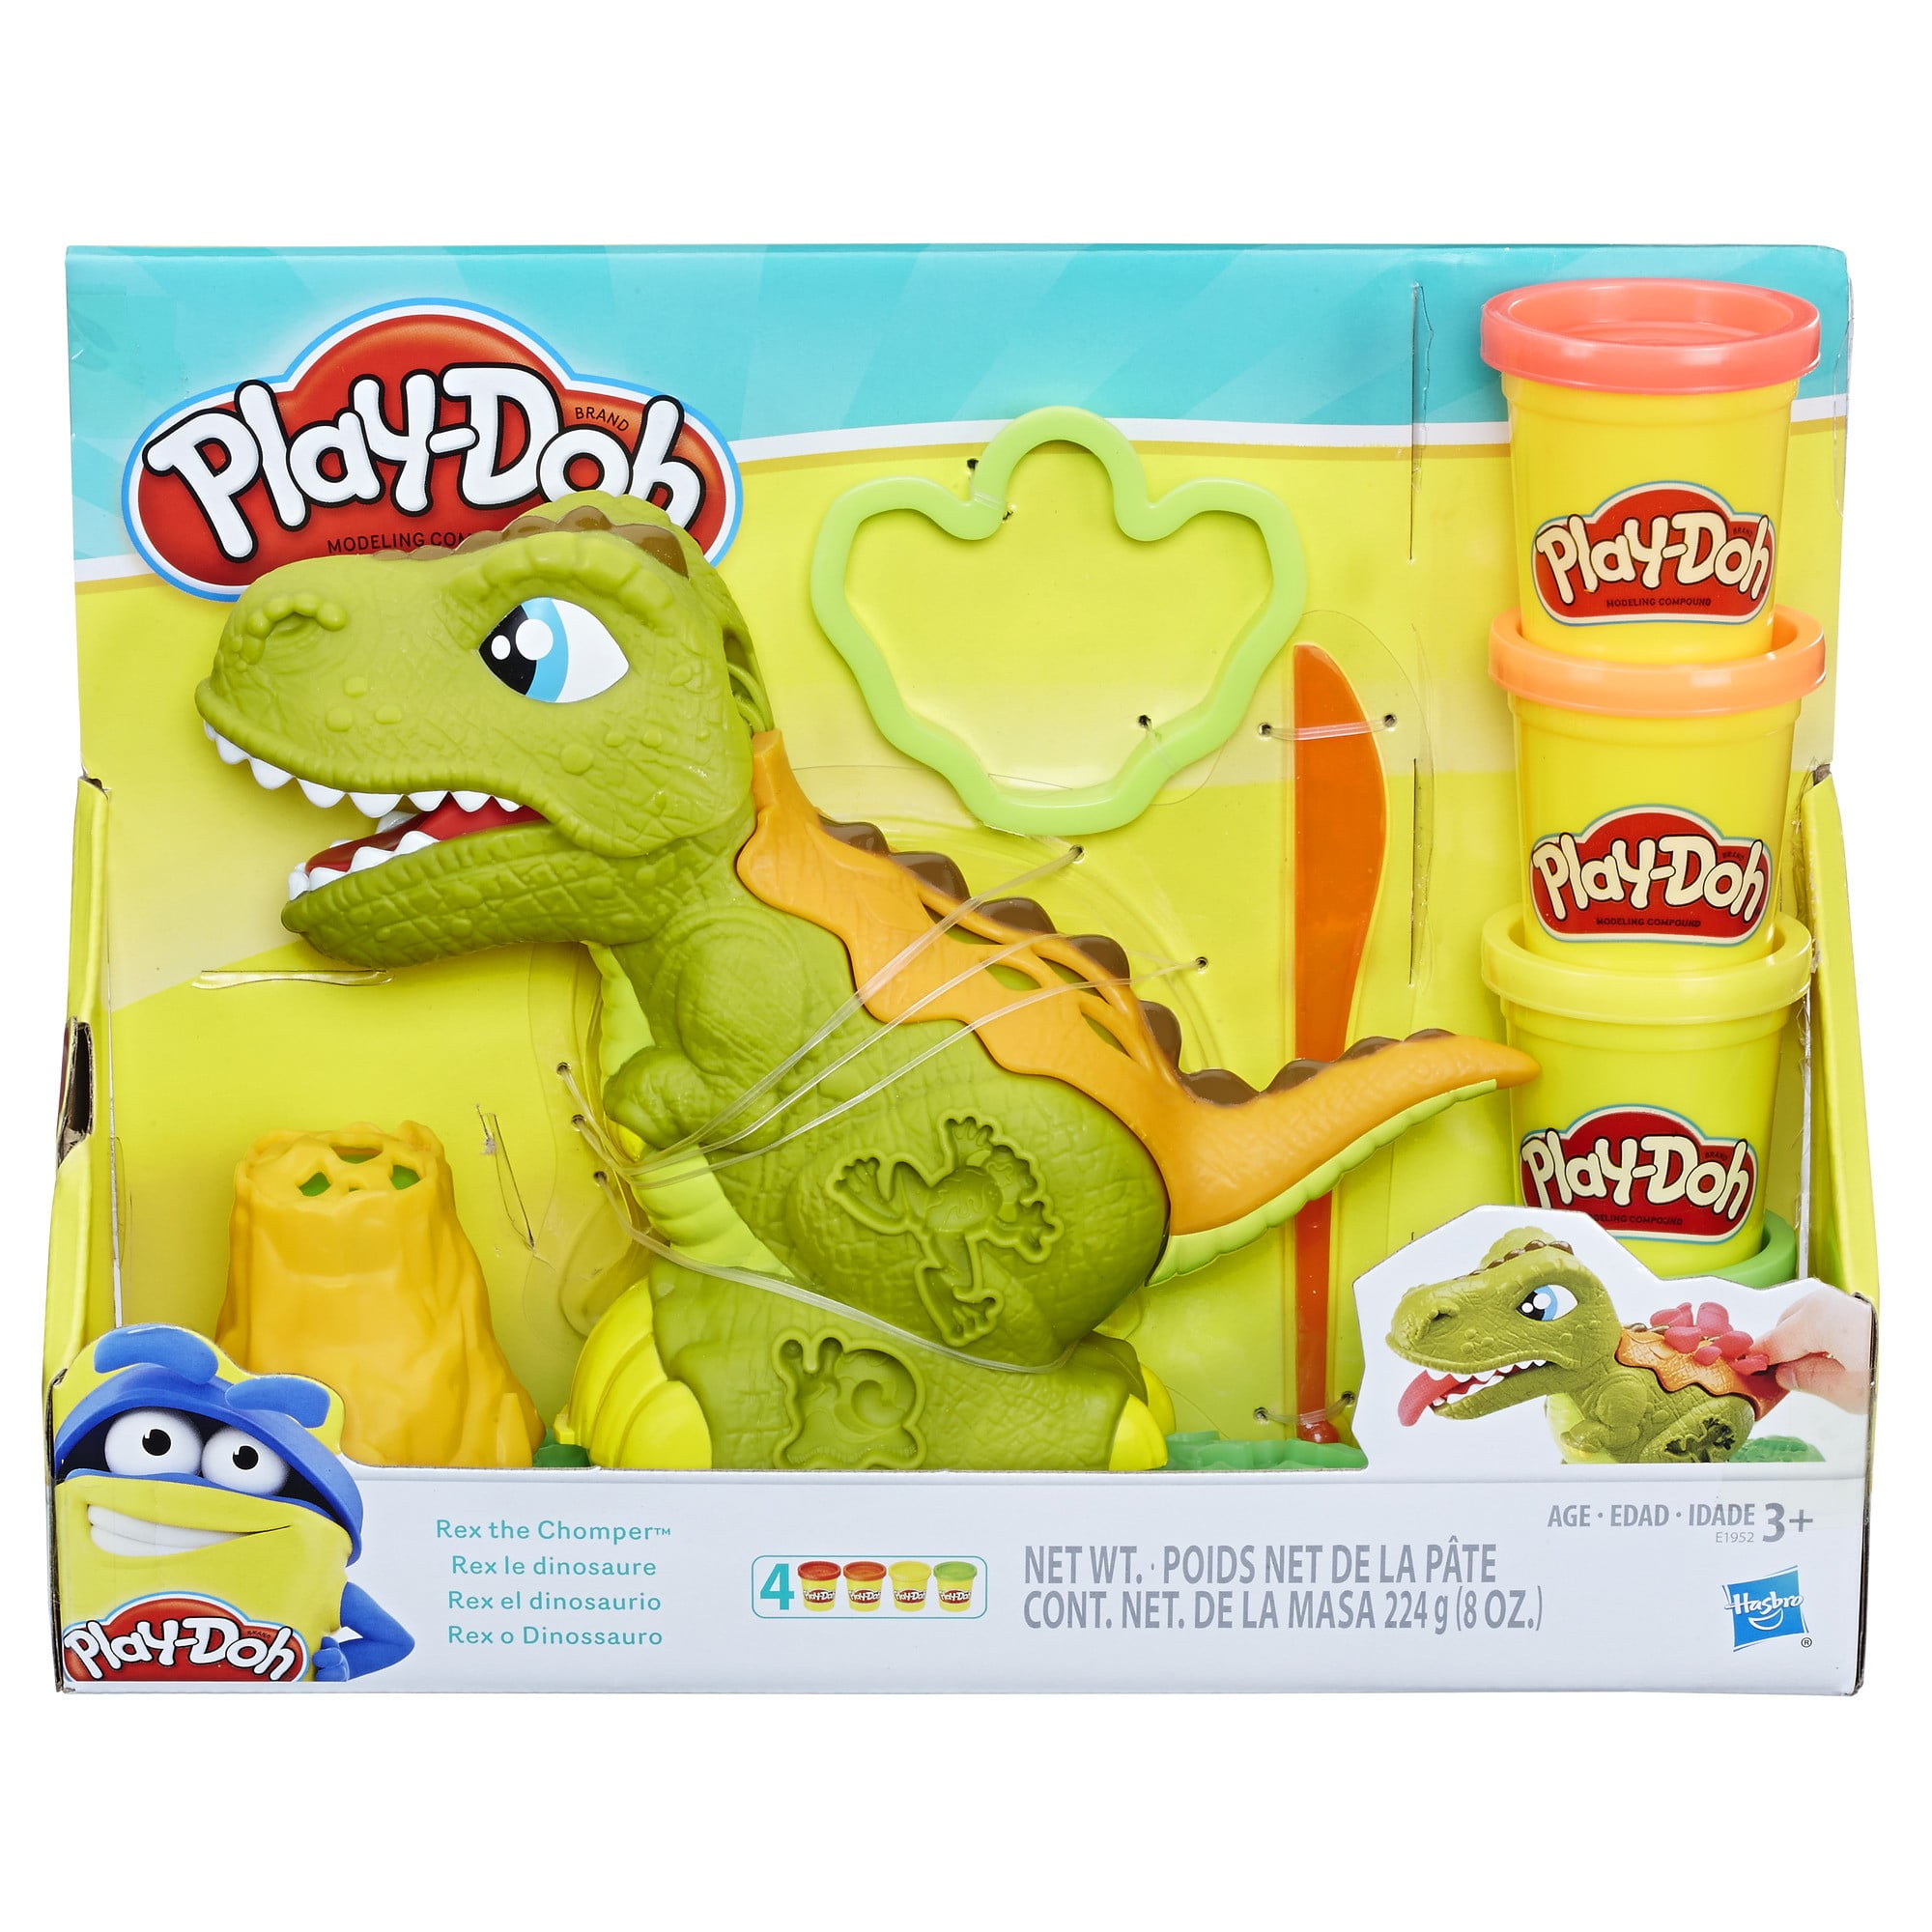 Play-Doh Dino Tools Dinosaur Toys with 3 Cans Modeling Compound 